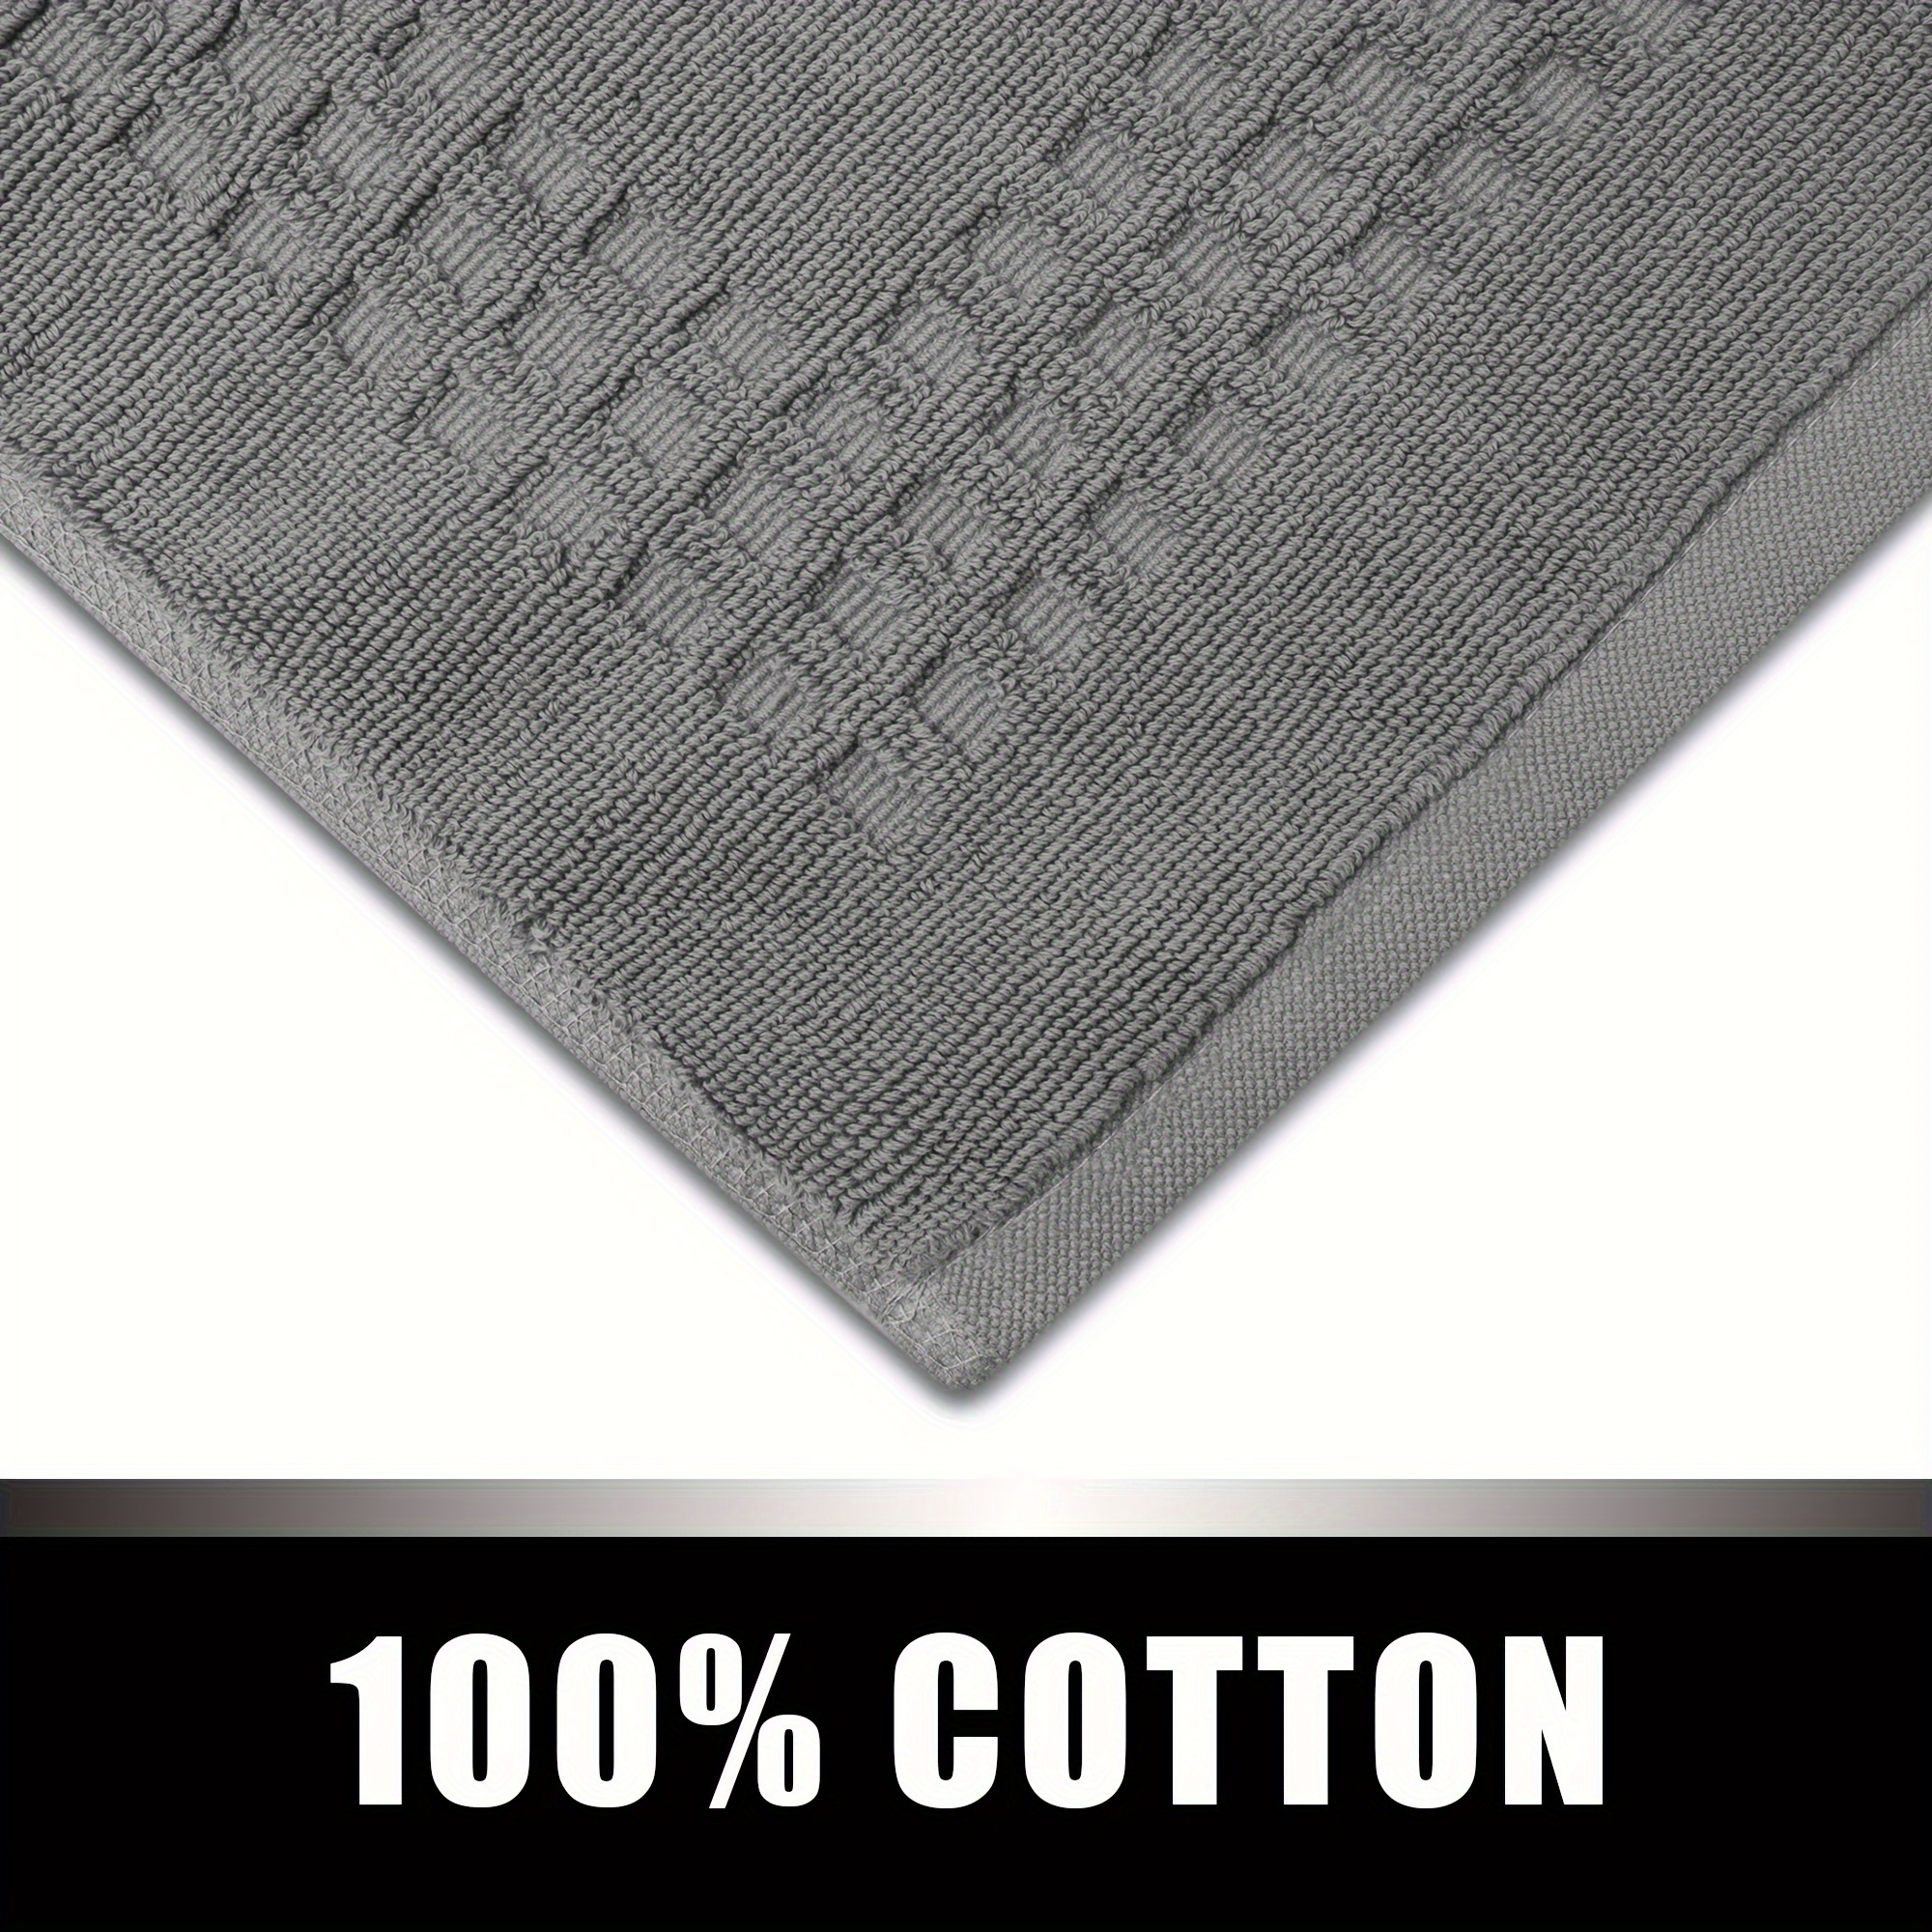 1Pc 100% Cotton Terry Bath Mats, Hotel Spa Bathroom Shower Step Out Tub  Floor Mats, [NOT A Bathroom Rug], Soft Absorbent Washable Mats, 24x17 Inch